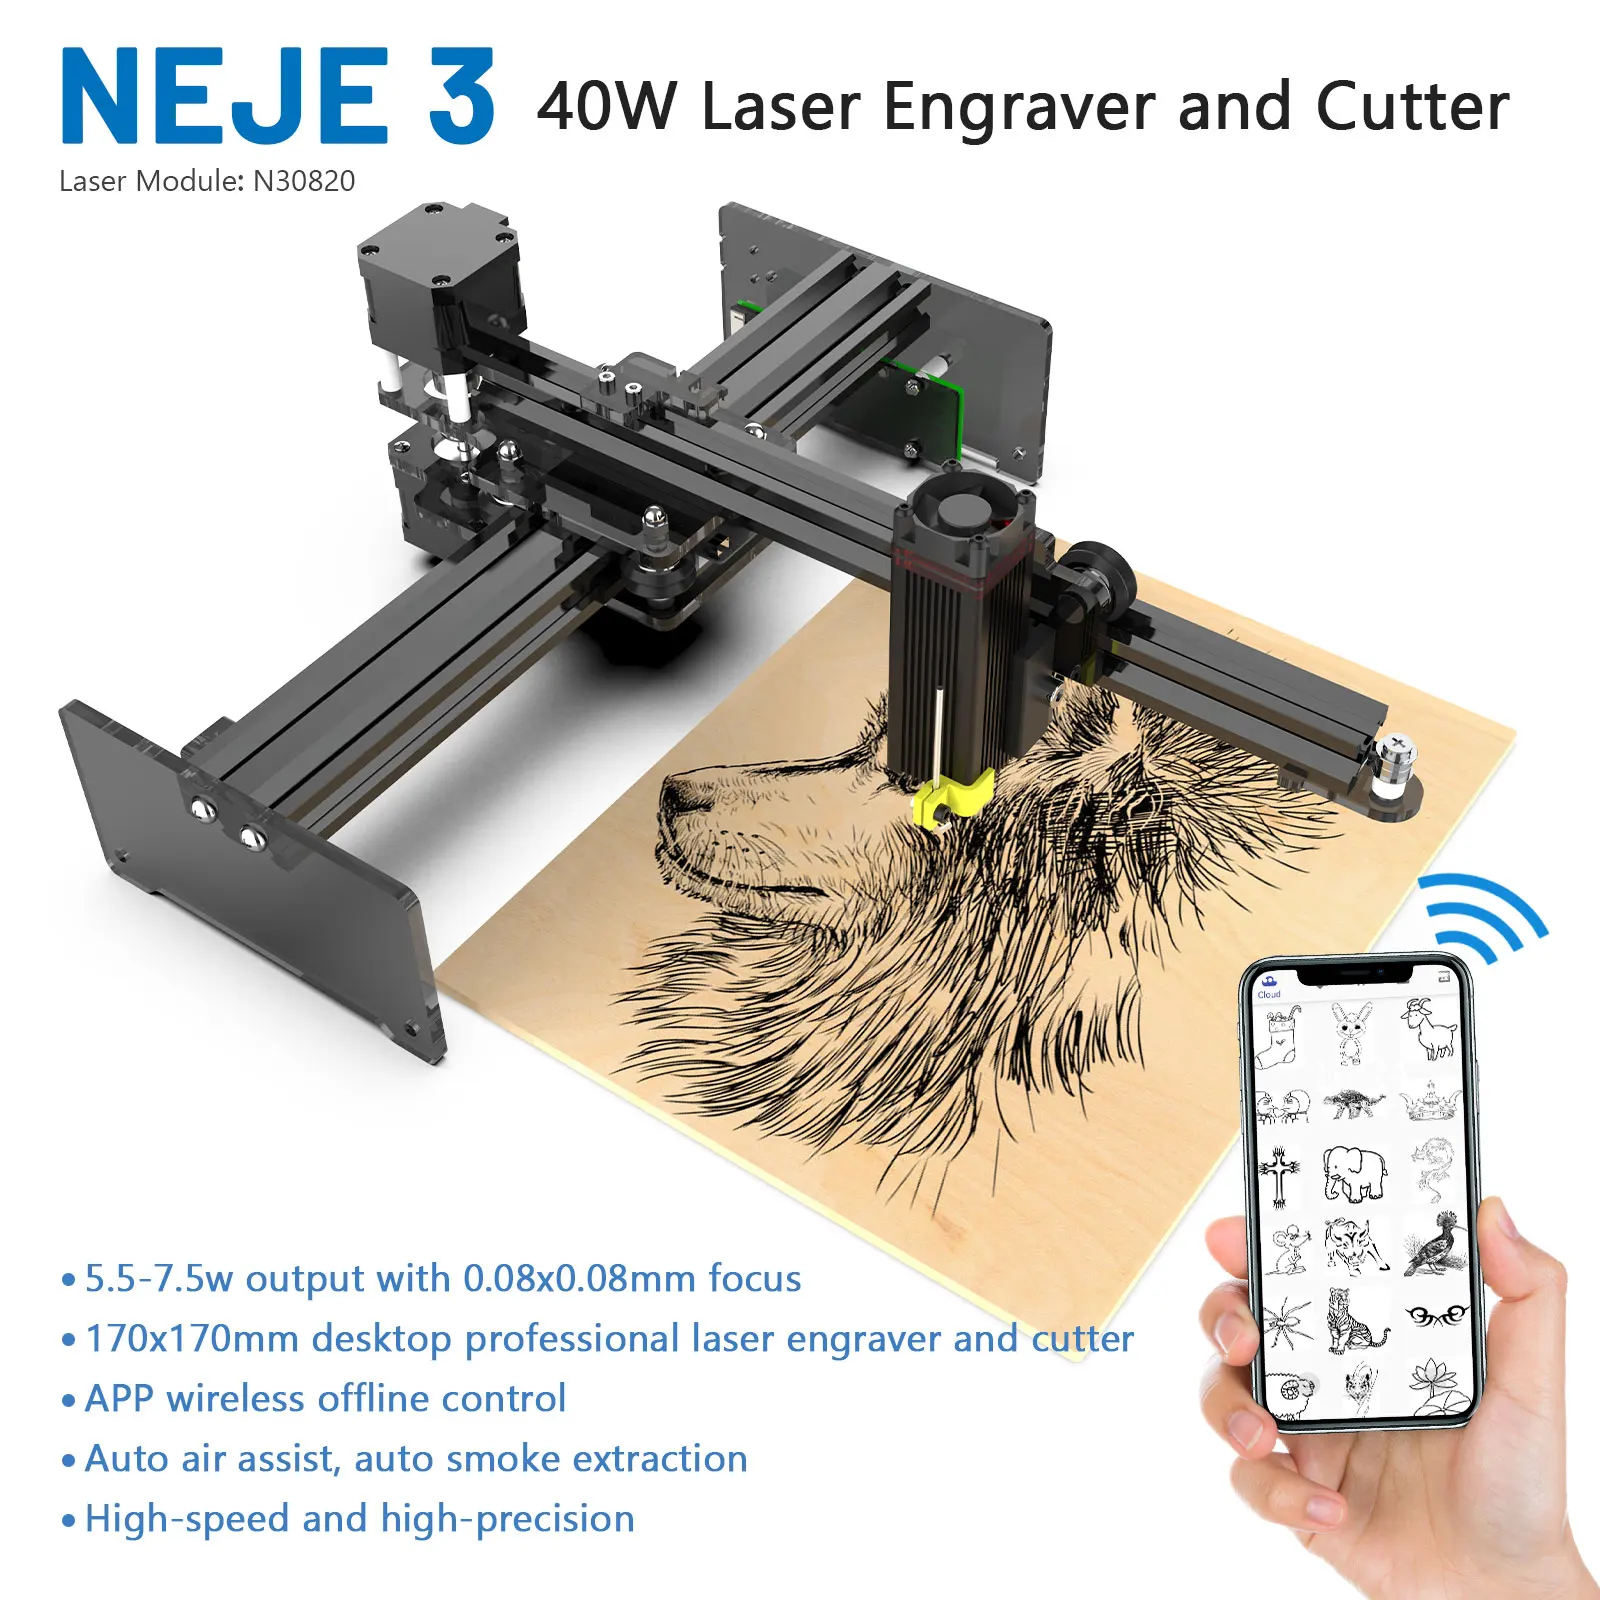 router bits for wood NEJE 3 40W Laser Engraver, 5.5-7.5W Output CNC Laser Cutter / Printer, 3D Wood Router Engraving and Cutting Machine woodworking bench for sale